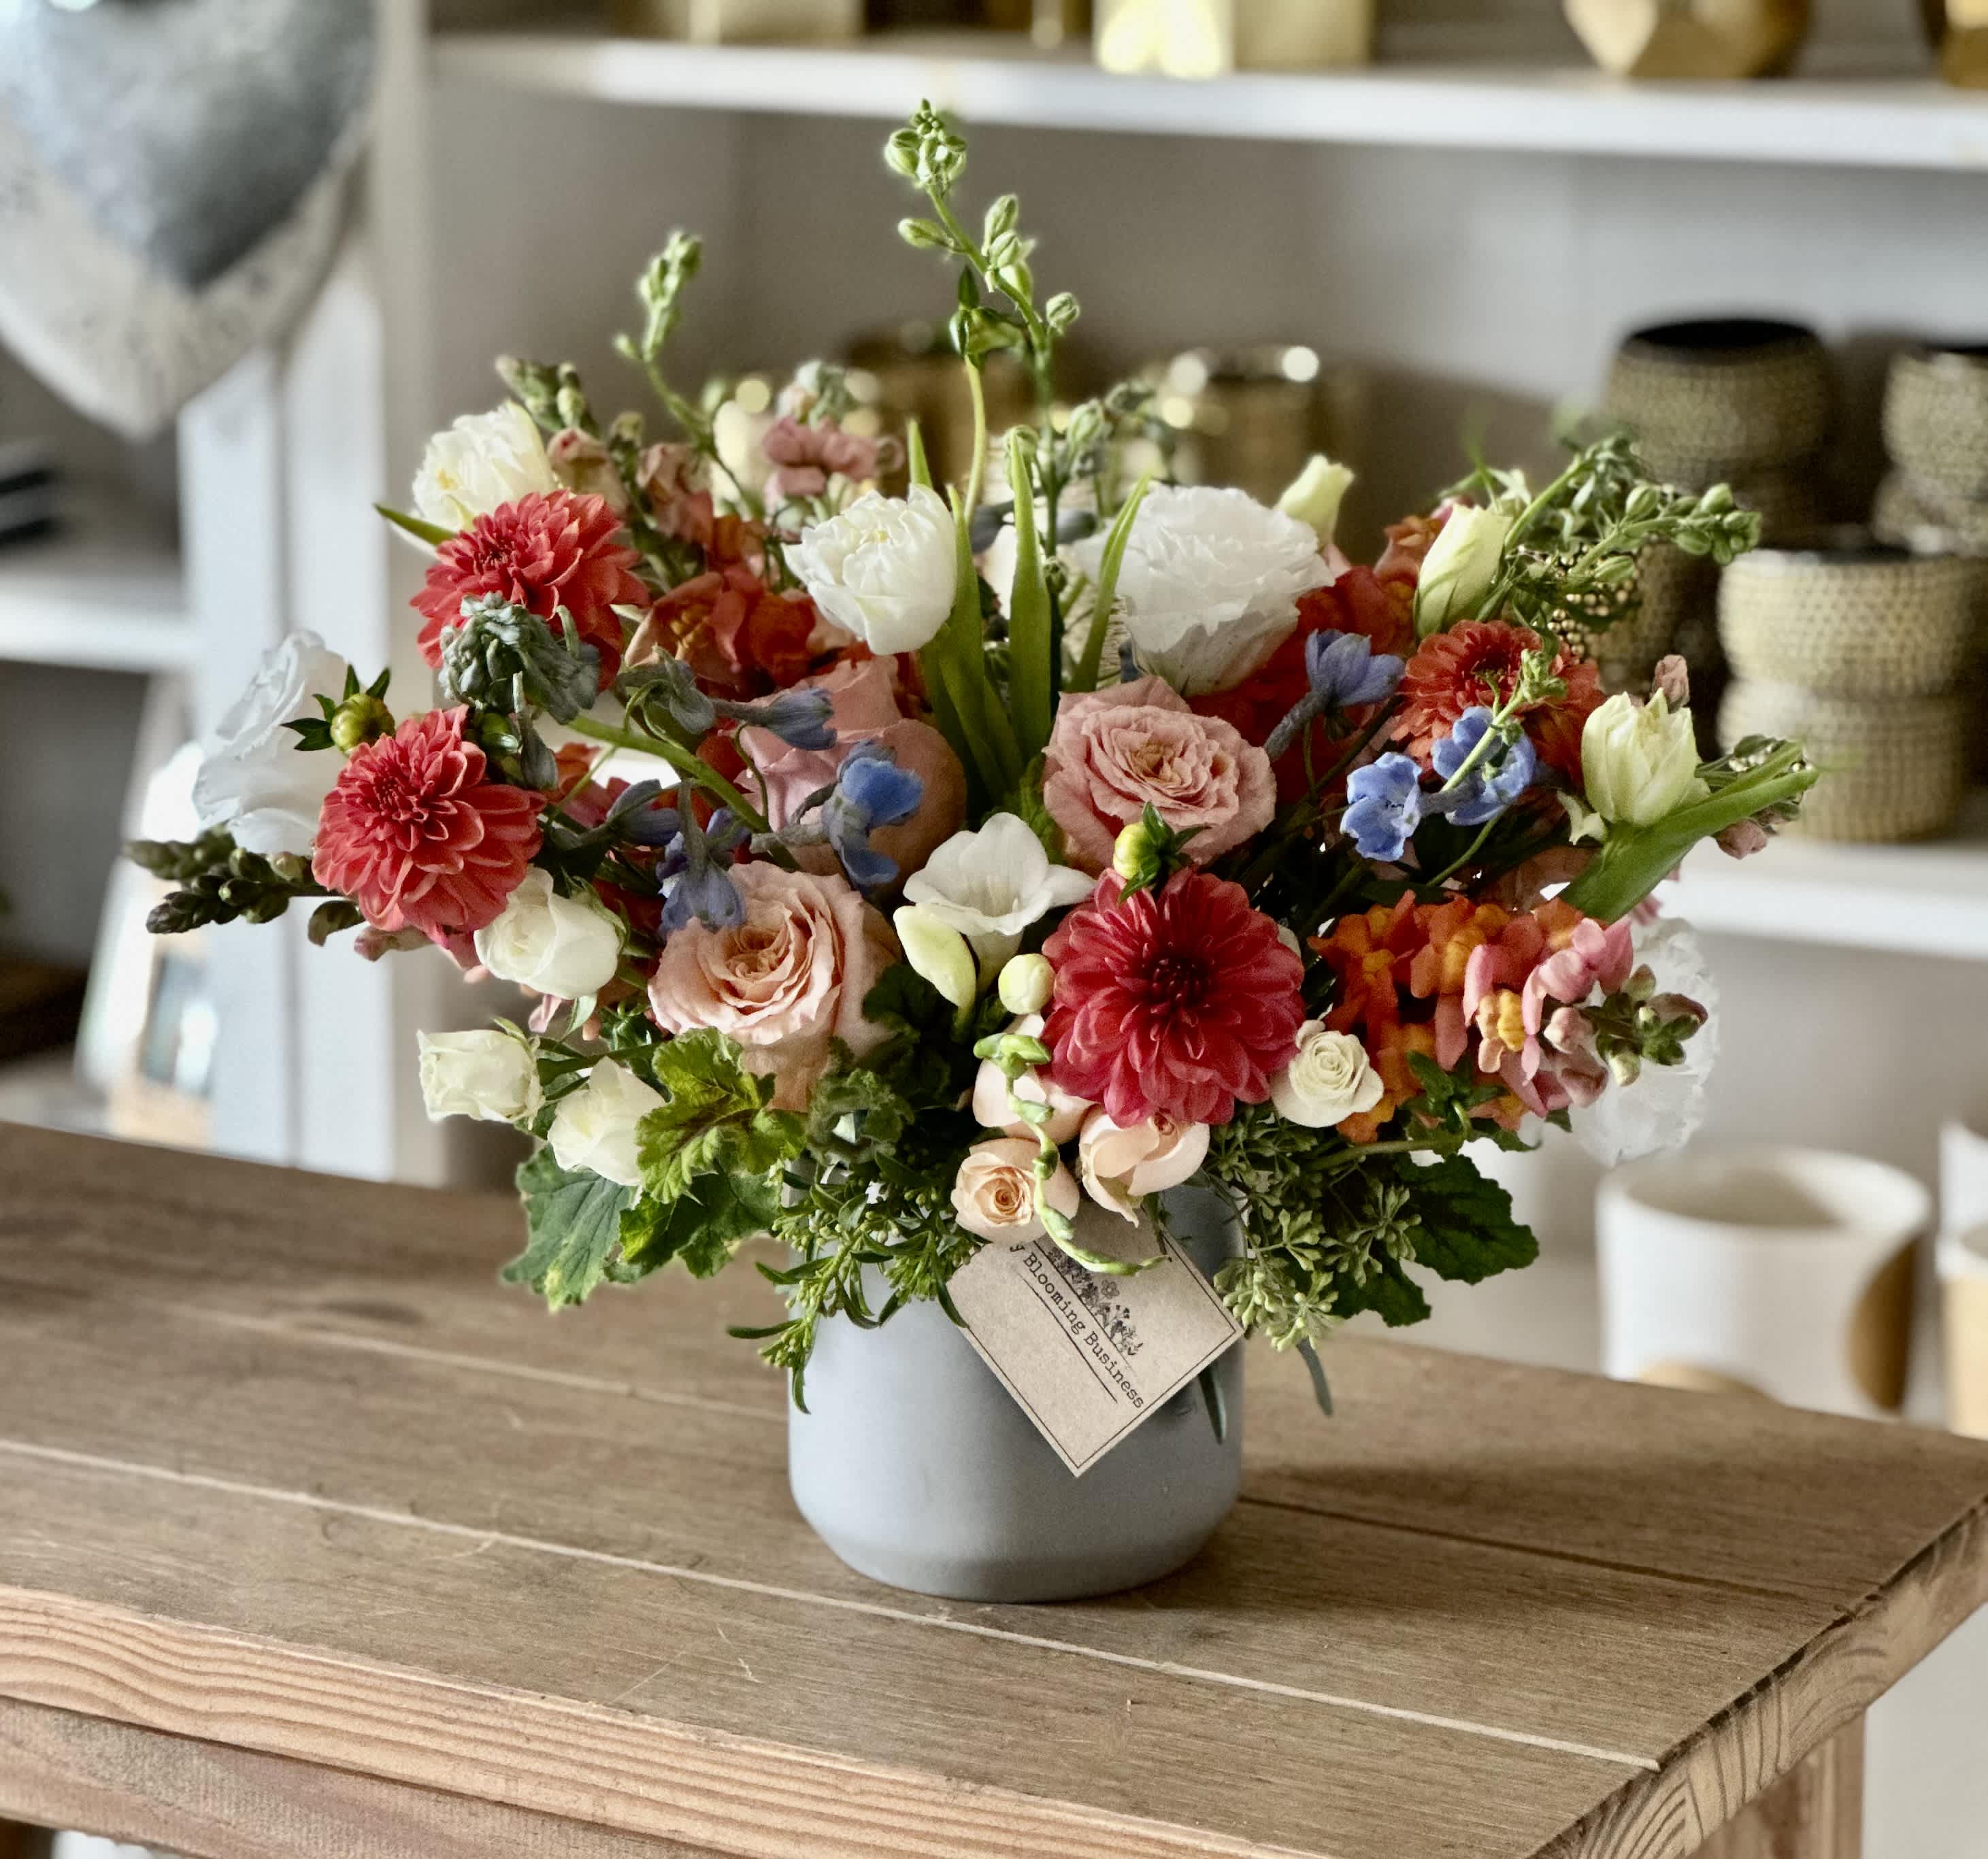 Hey There Gorgeous  - Hey There Gorgeous arrangement s a grey vase filled with Oranges, Peach, Cream colored florals with a hint of Blue. This is an arrangement that is perfect for any occasion to send to friends and loved ones.  